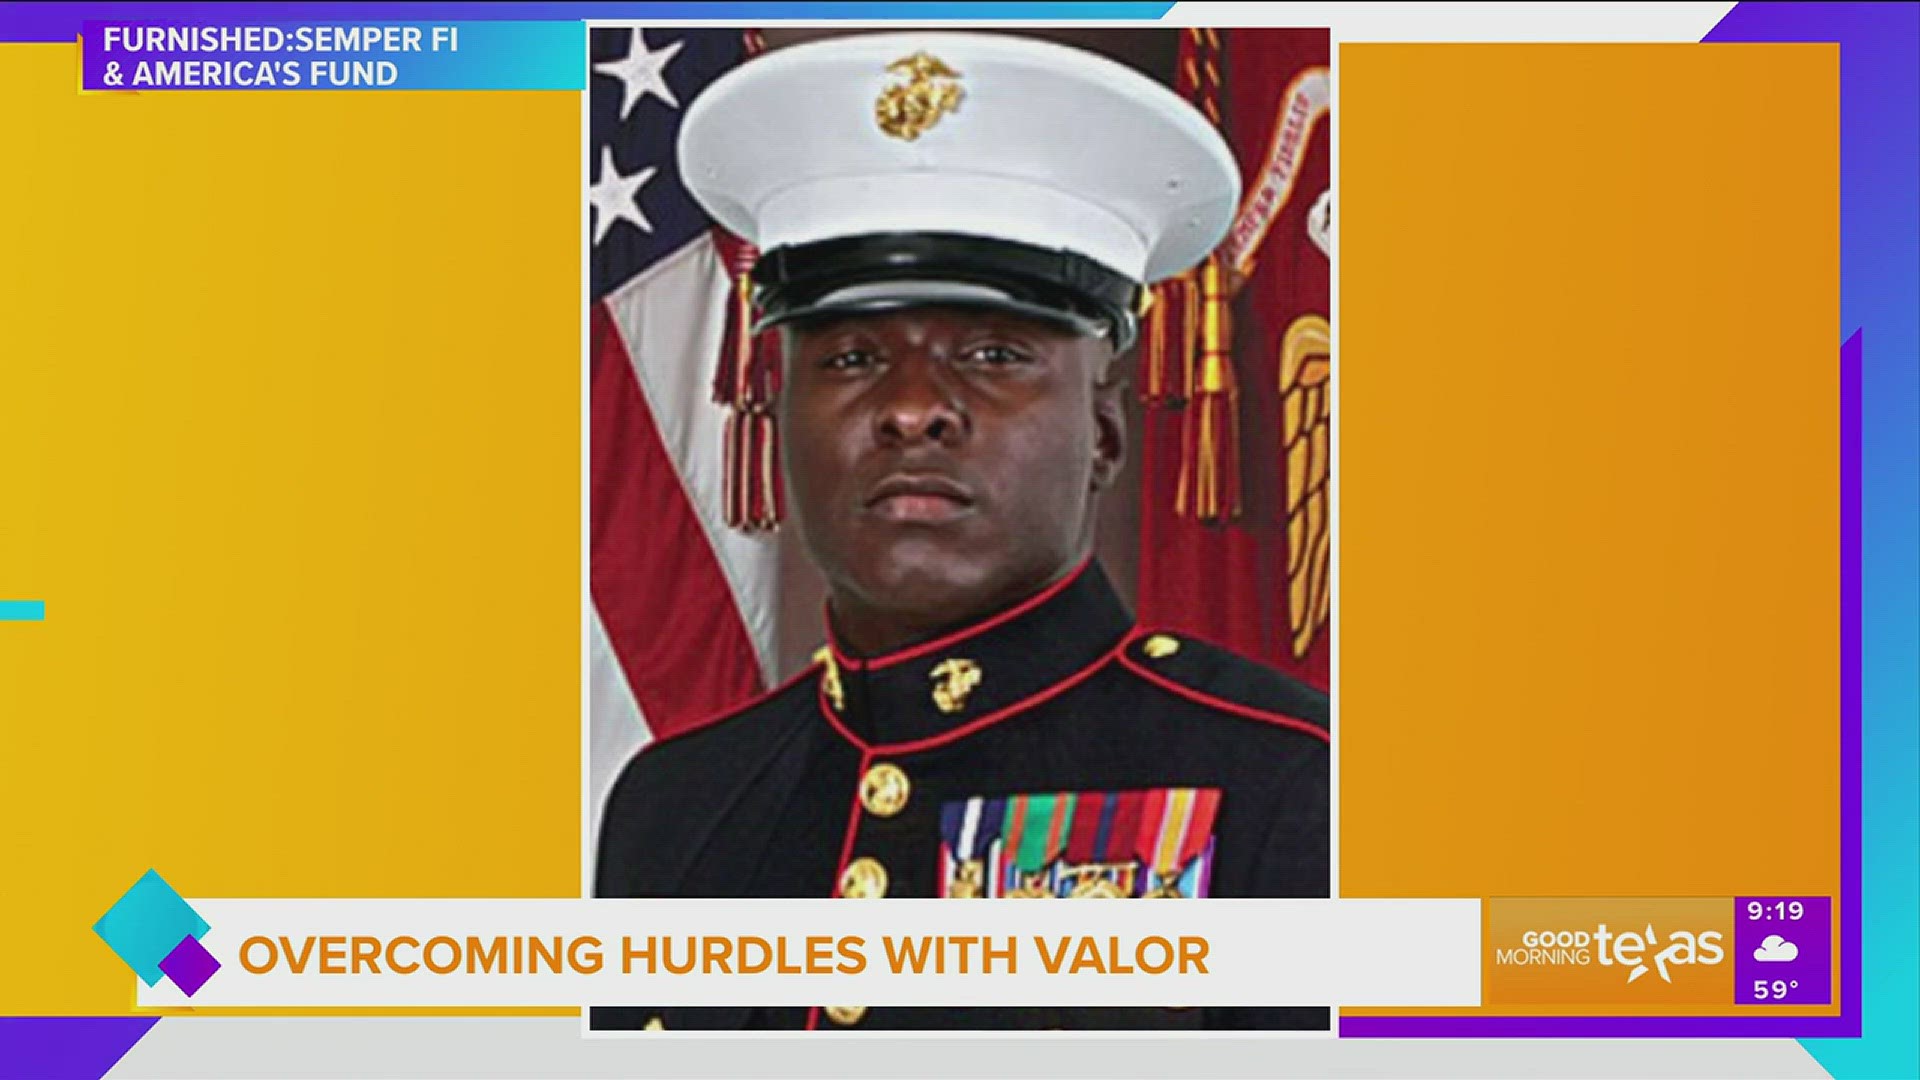 Navy Cross recipient & Gunnery Sergeant Aubrey McDade Jr. shares his story and how he found the support he needed post-military. Go to thefund.org & valor-gs.com.